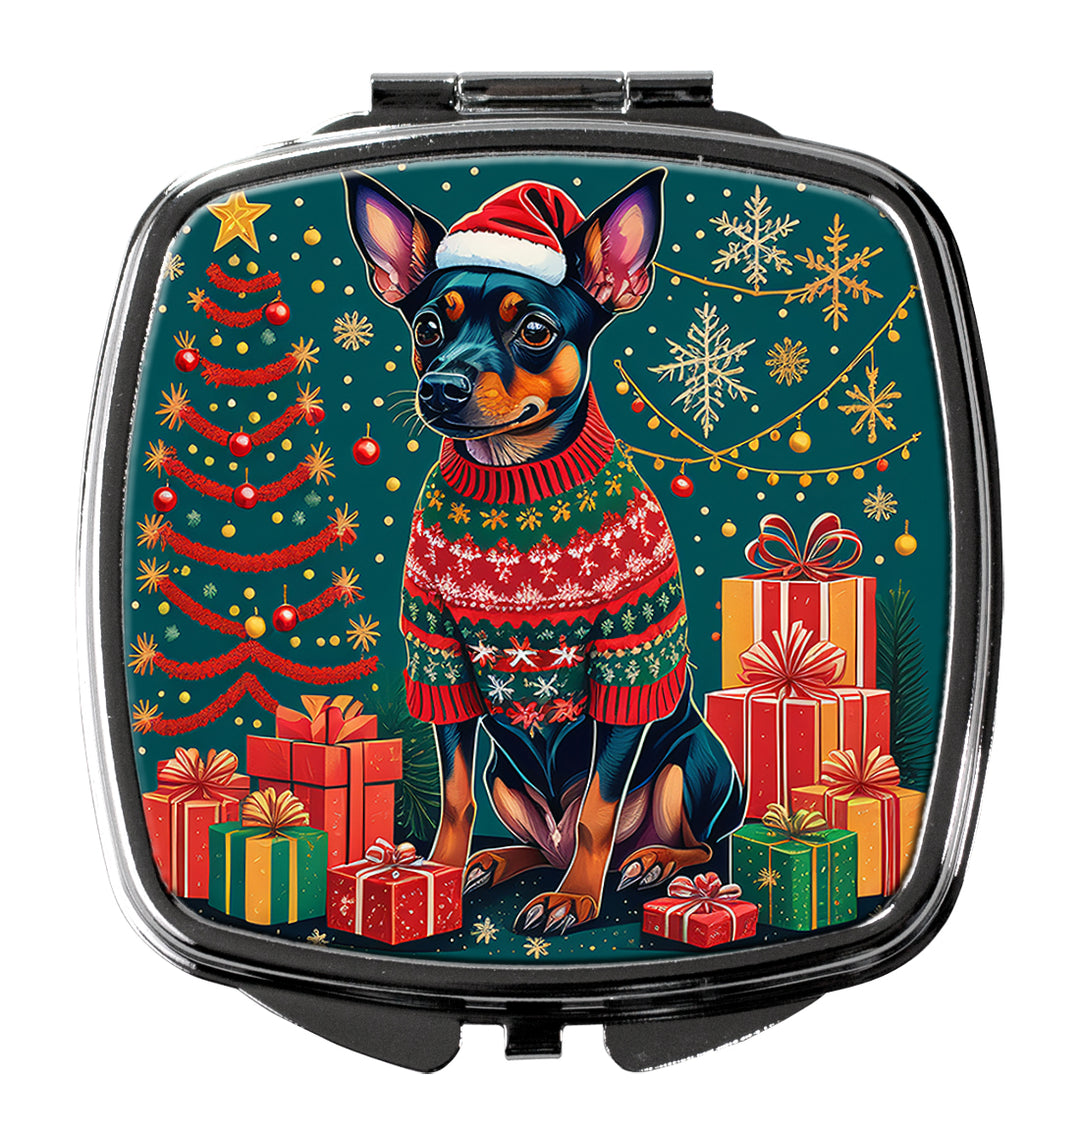 Yorkie Yorkshire Terrier Christmas Compact Mirror Image 6